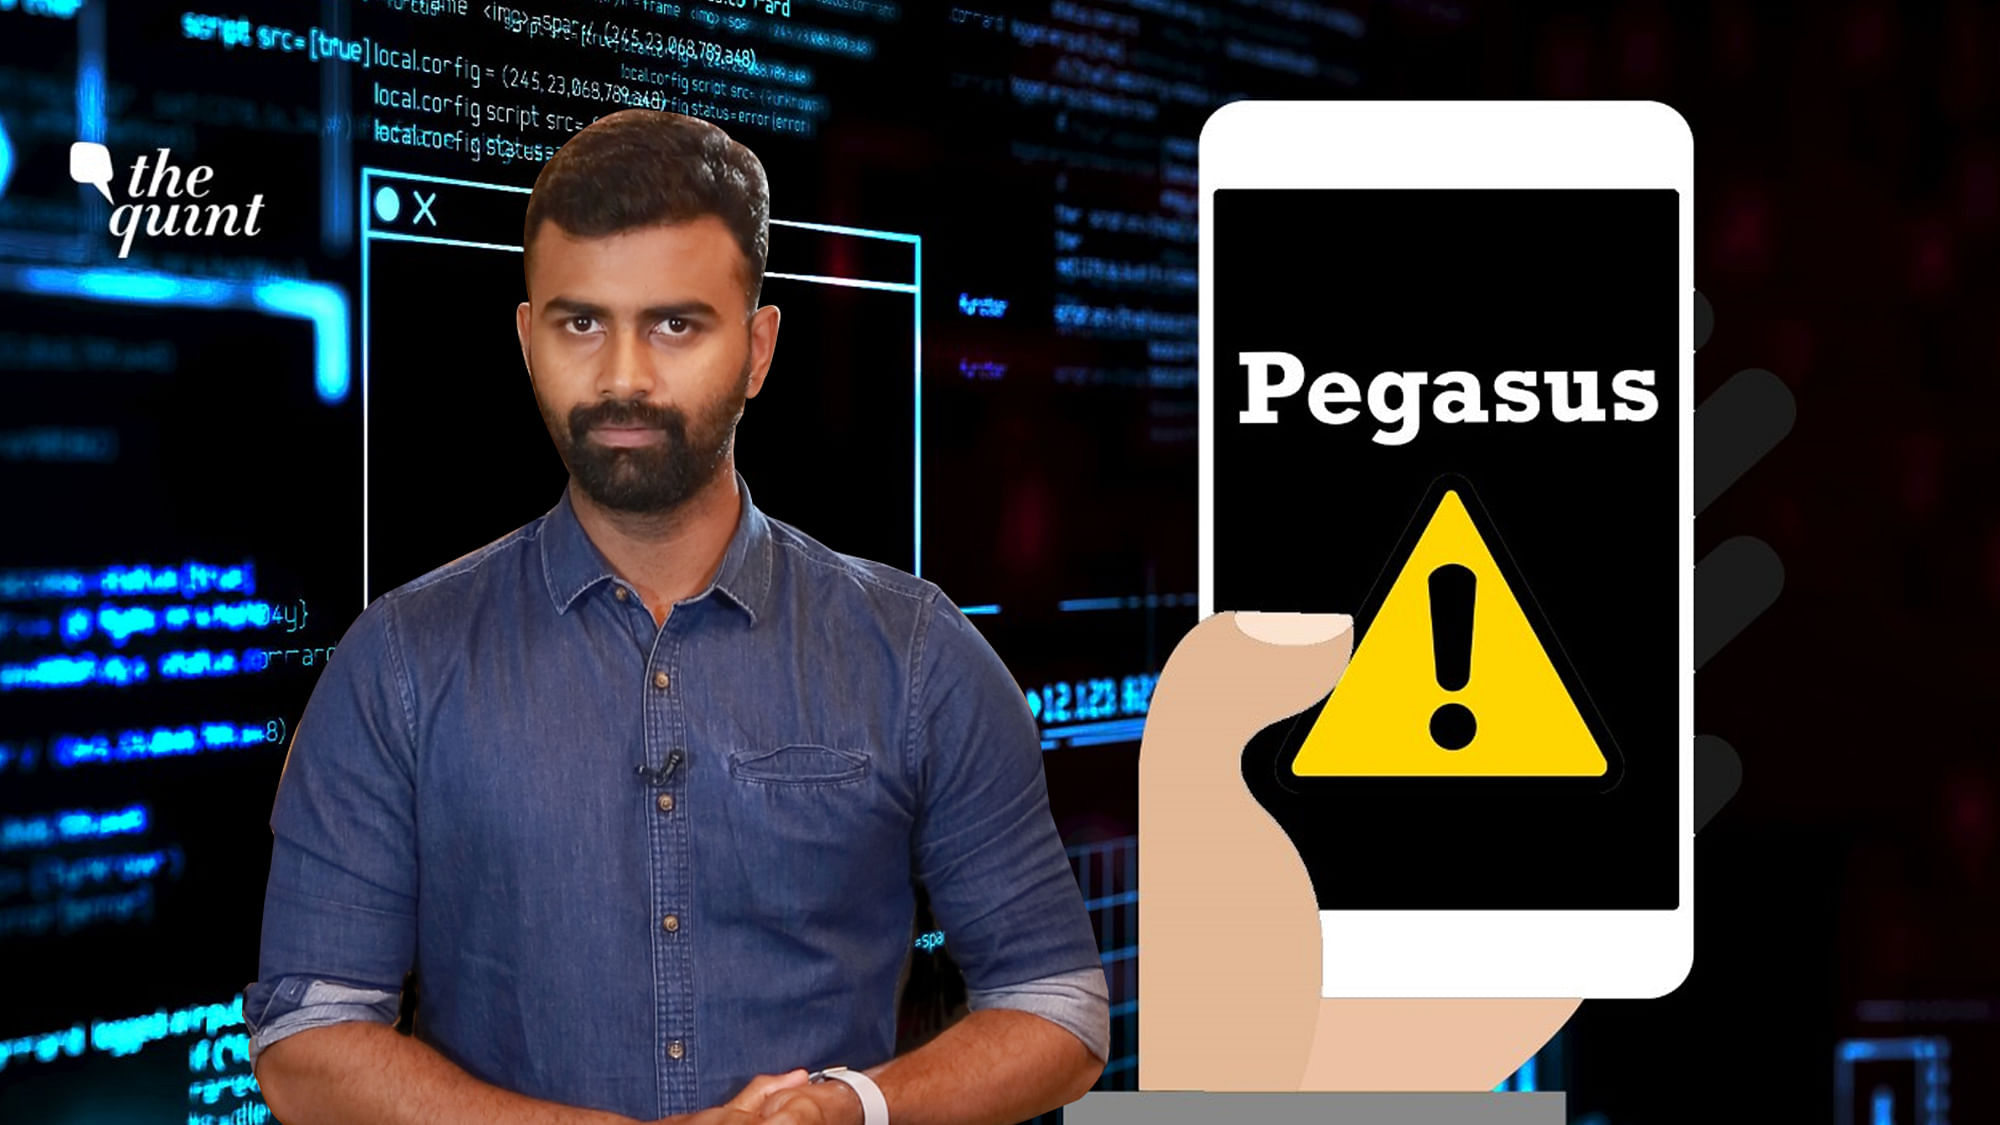 Pegasus is a program developed by Israel-based cyber security firm.